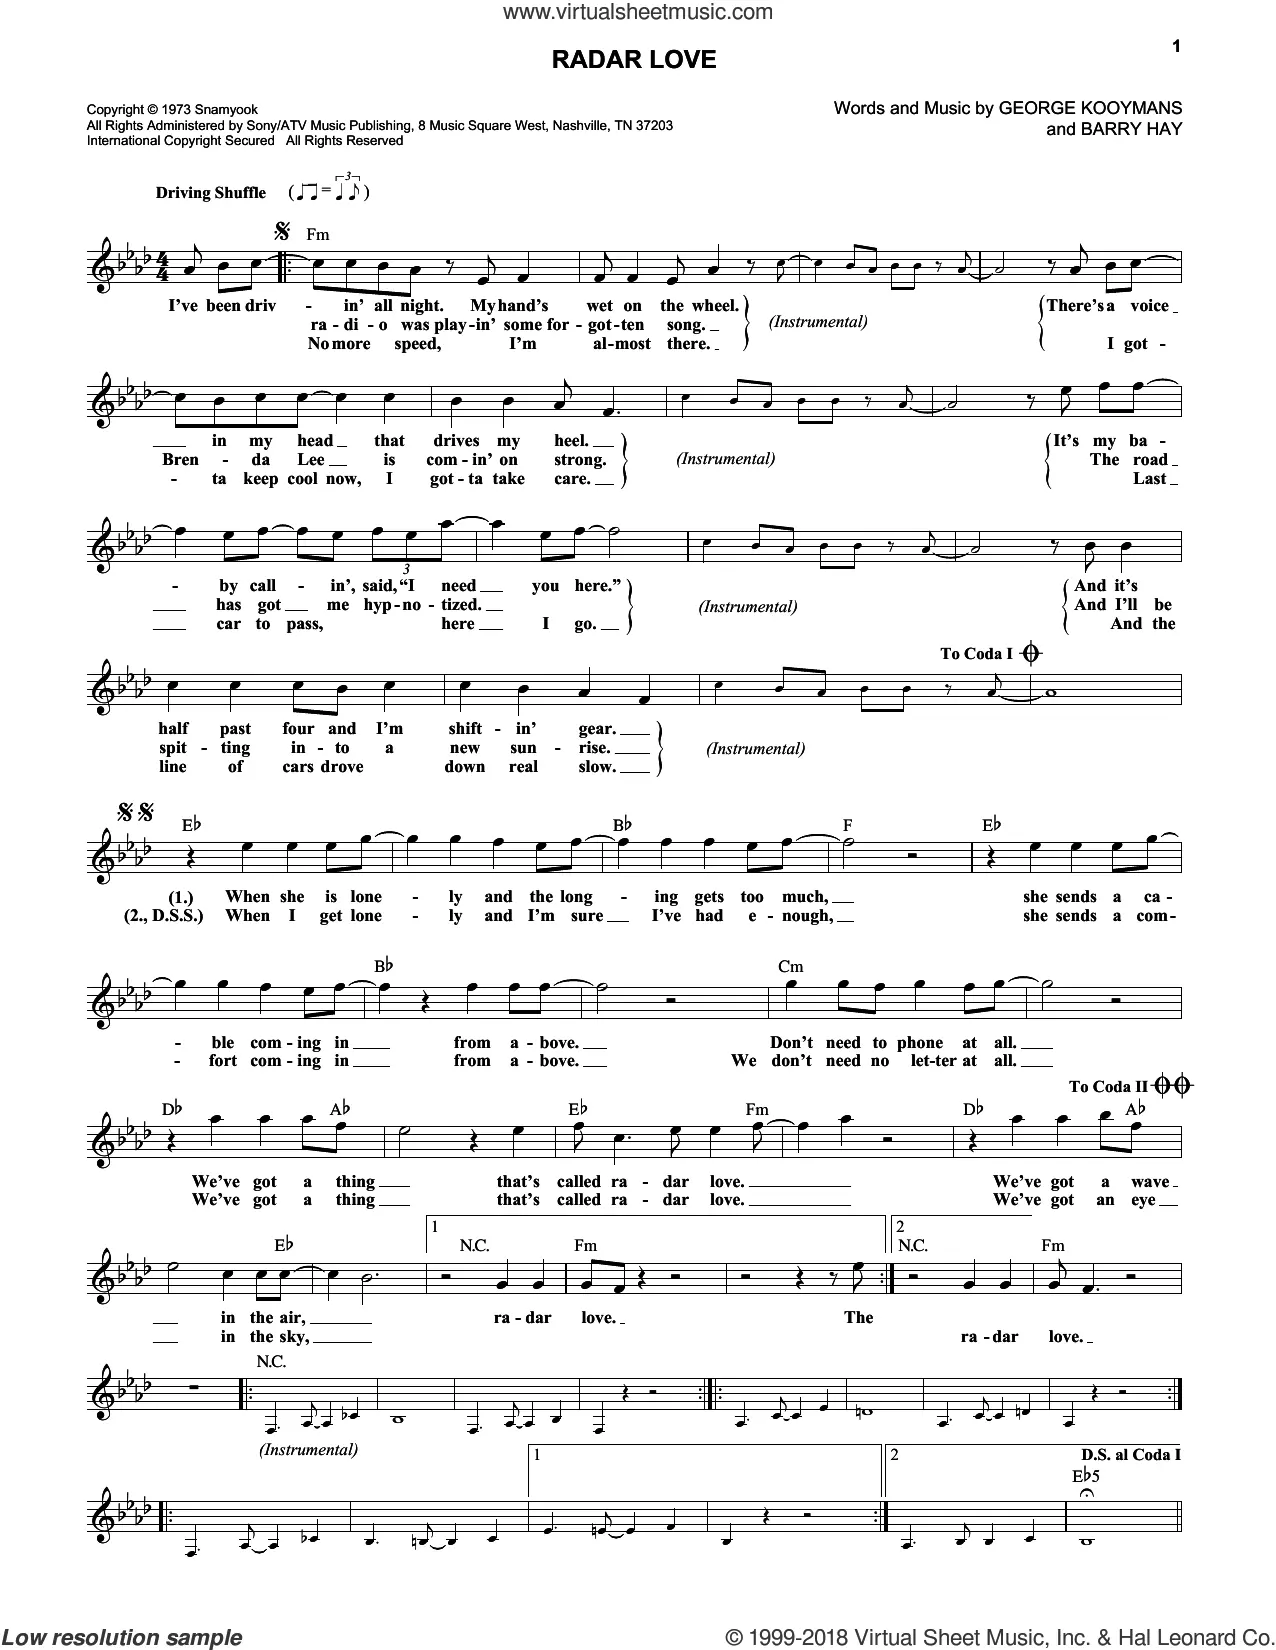 Golden Earring Sheet Music to download and print